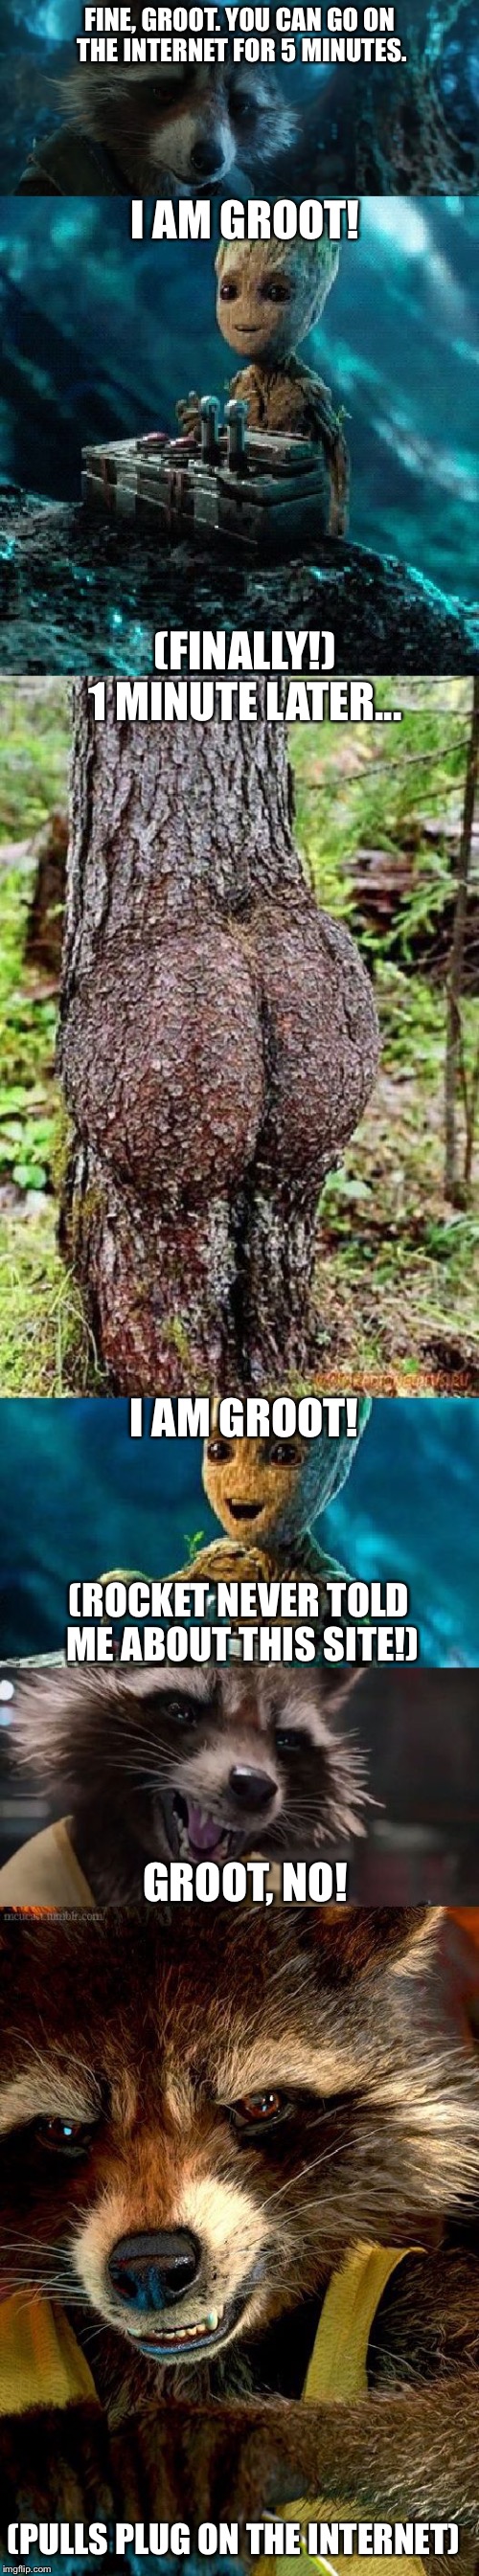 Groot Goes on the Internet... | FINE, GROOT. YOU CAN GO ON THE INTERNET FOR 5 MINUTES. I AM GROOT! (FINALLY!); 1 MINUTE LATER... I AM GROOT! (ROCKET NEVER TOLD ME ABOUT THIS SITE!); GROOT, NO! (PULLS PLUG ON THE INTERNET) | image tagged in groot's internet adventure,memes | made w/ Imgflip meme maker